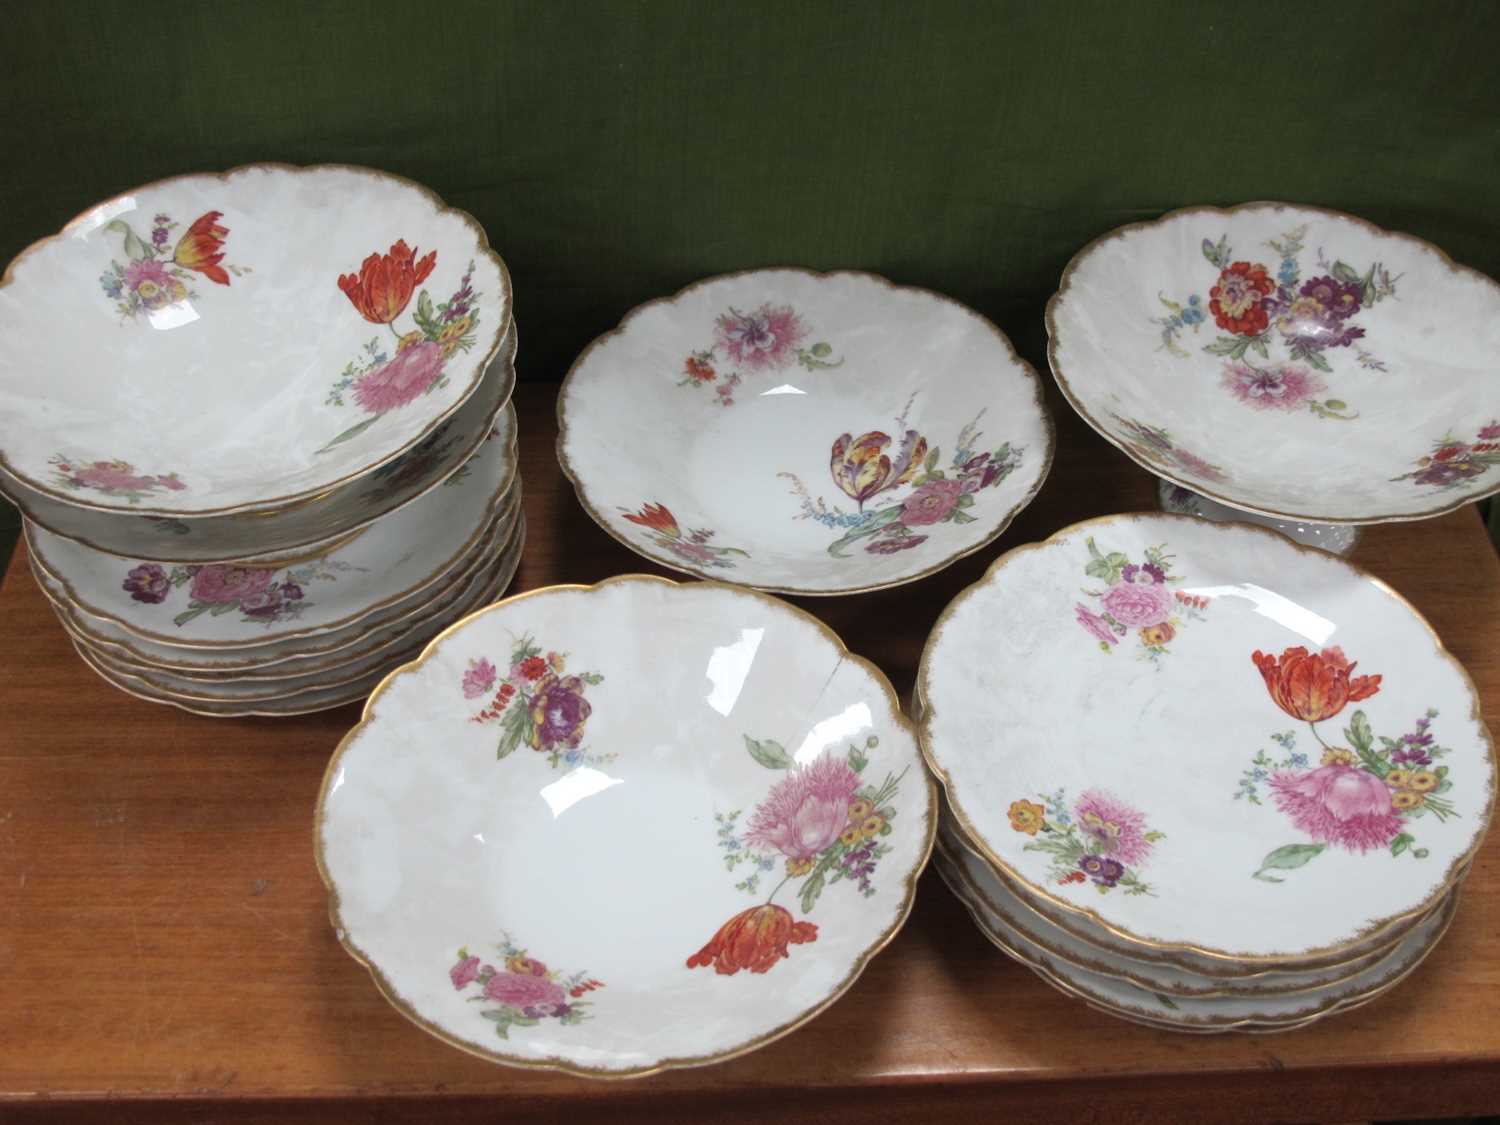 Limoges Early XX Century Porcelain Dessert Service, of fifteen pieces, decorated with floral